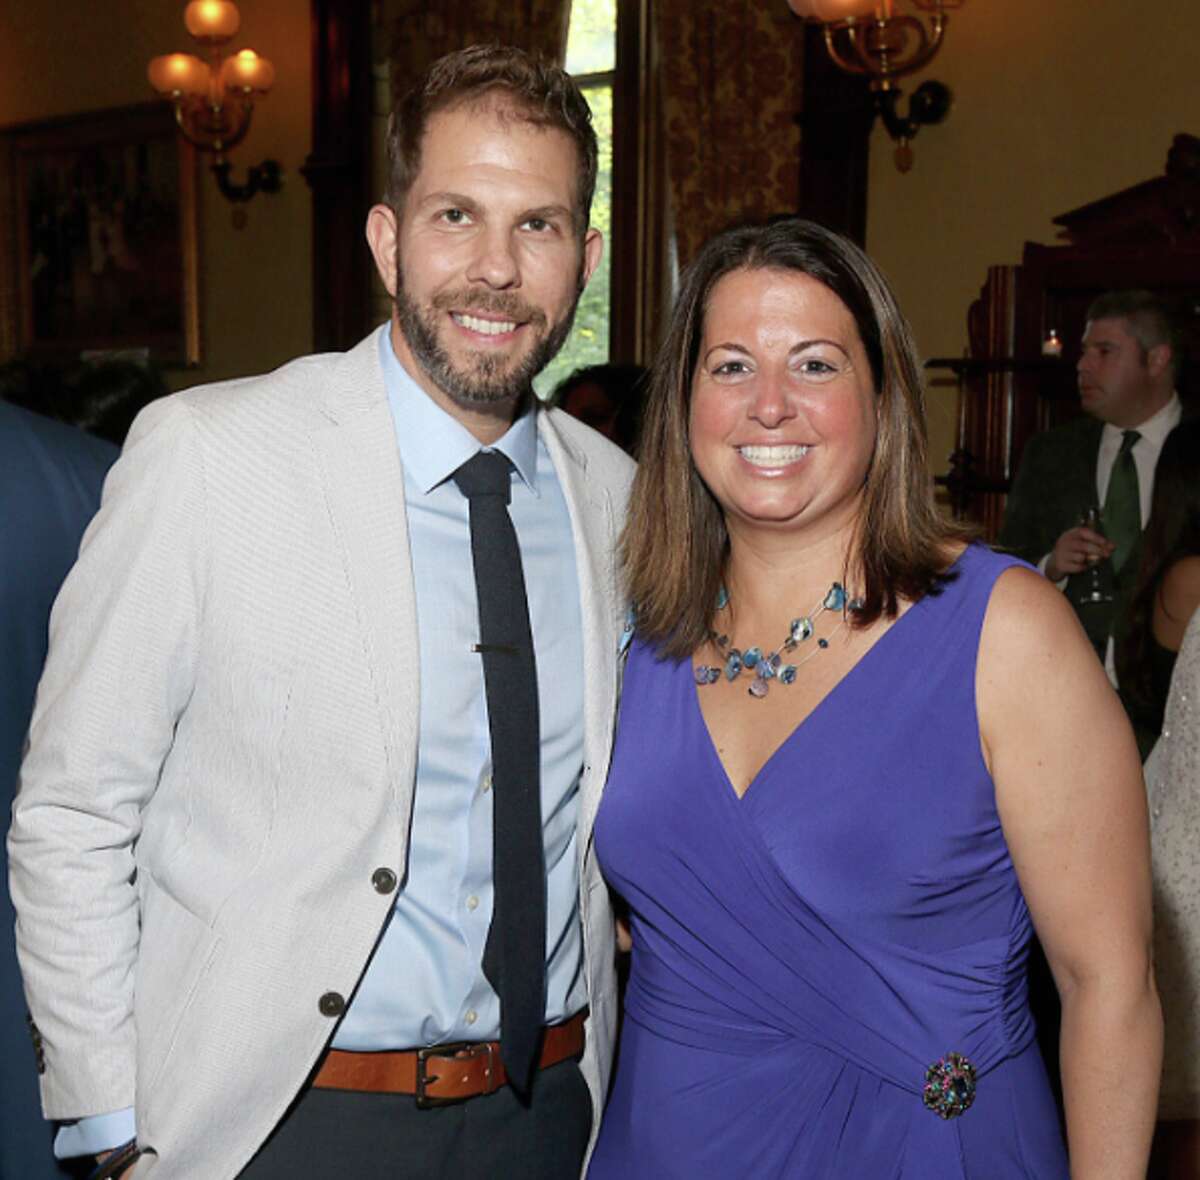 Were you Seen at "A Night in Tuscany," honoring Brian Cody and Chrissy Cavotta of Fly 92.3's Morning Rush? The benefit for the American Cancer Society HopeClub was held at the Canfield Casino in Saratoga Springs on Thursday, July 16, 2015.